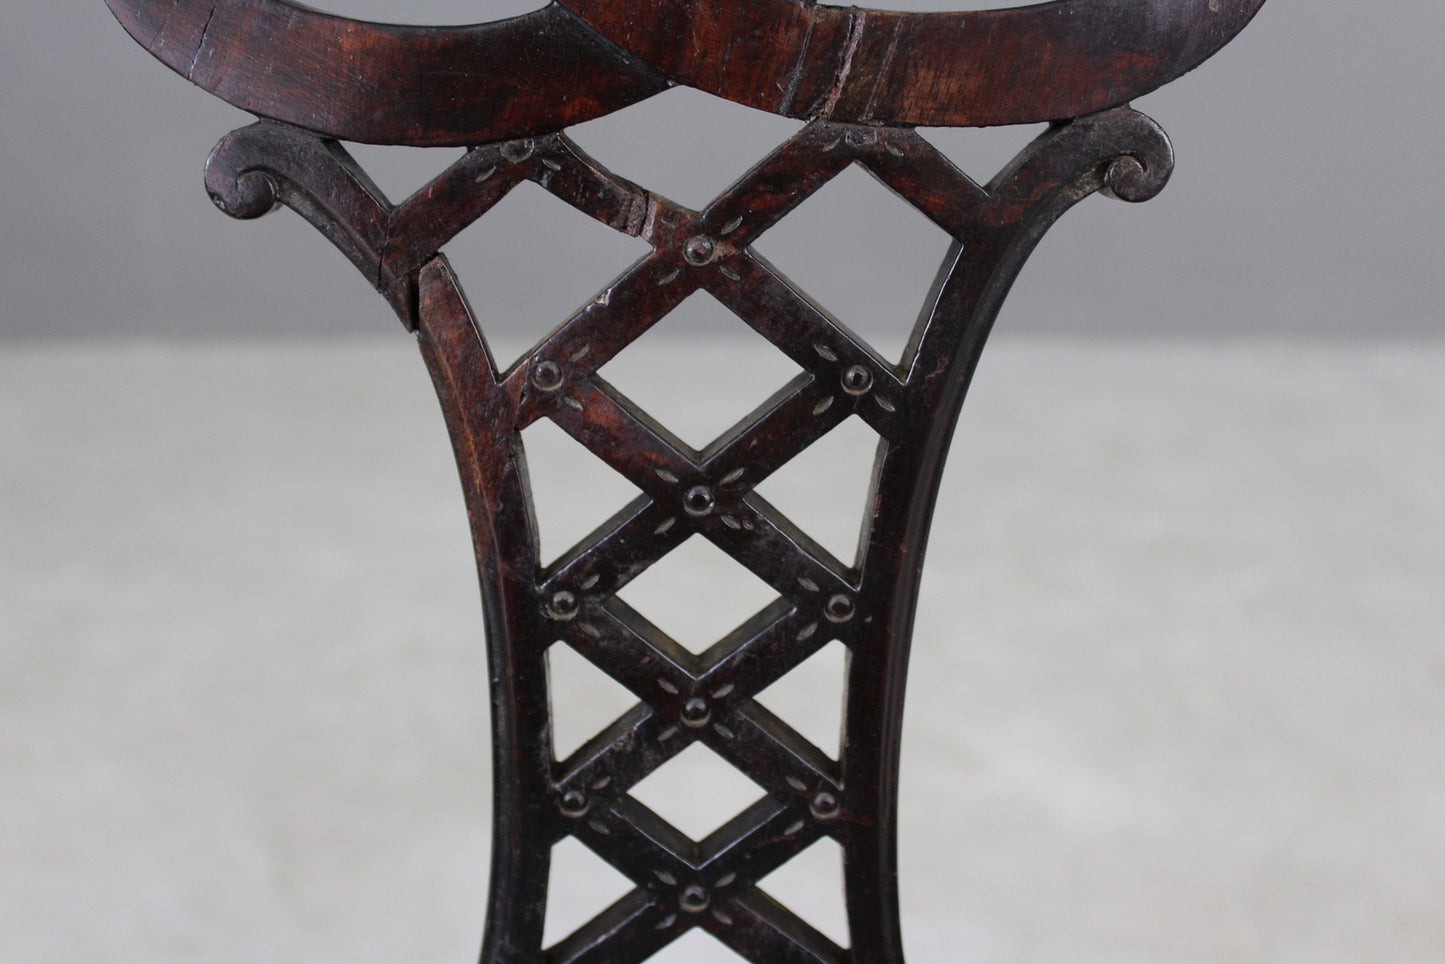 Chippendale Style Dining Chair - Kernow Furniture